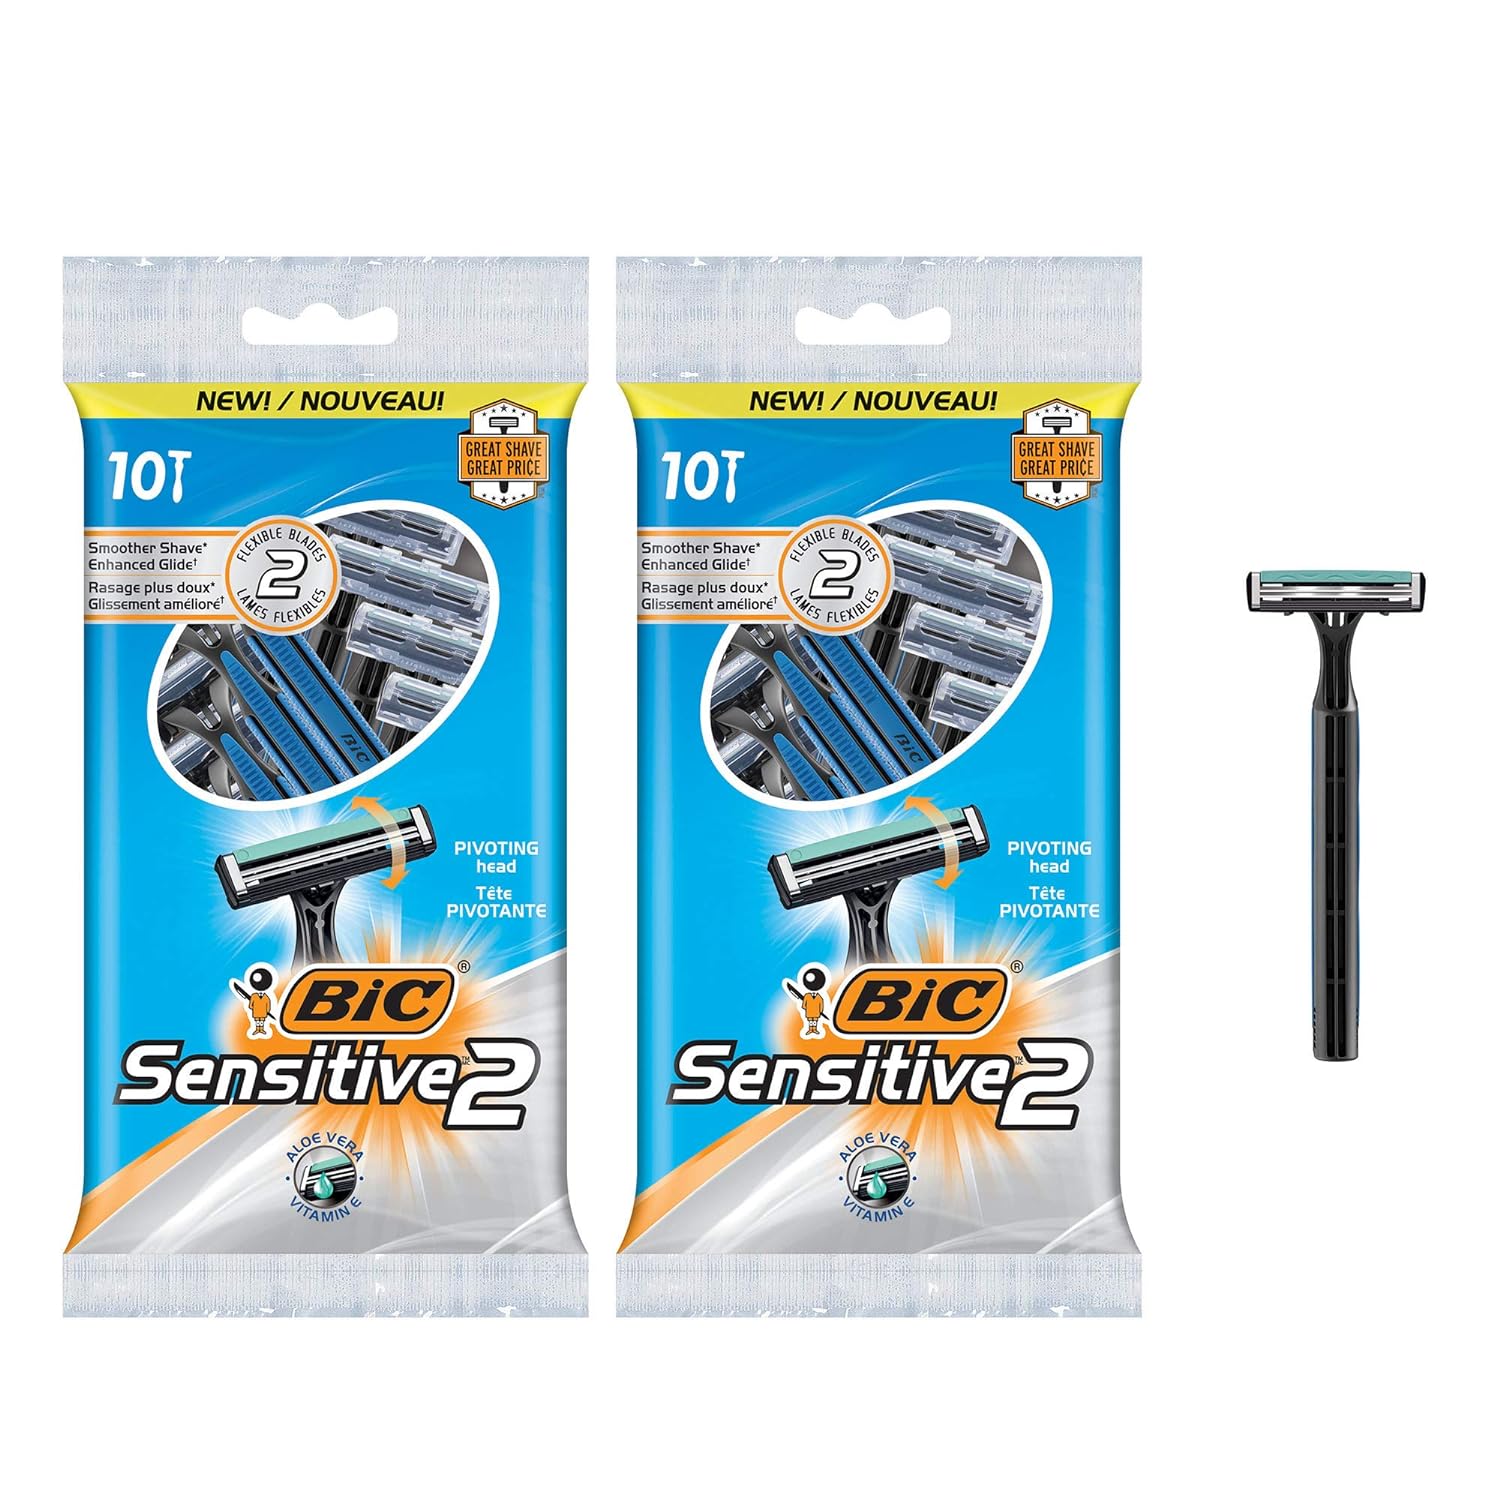 BIC Sensitive 2 Men' Disposable Razor, Two Blade, Pack of 20 Razors, For a Soothing and Comfortable Shave